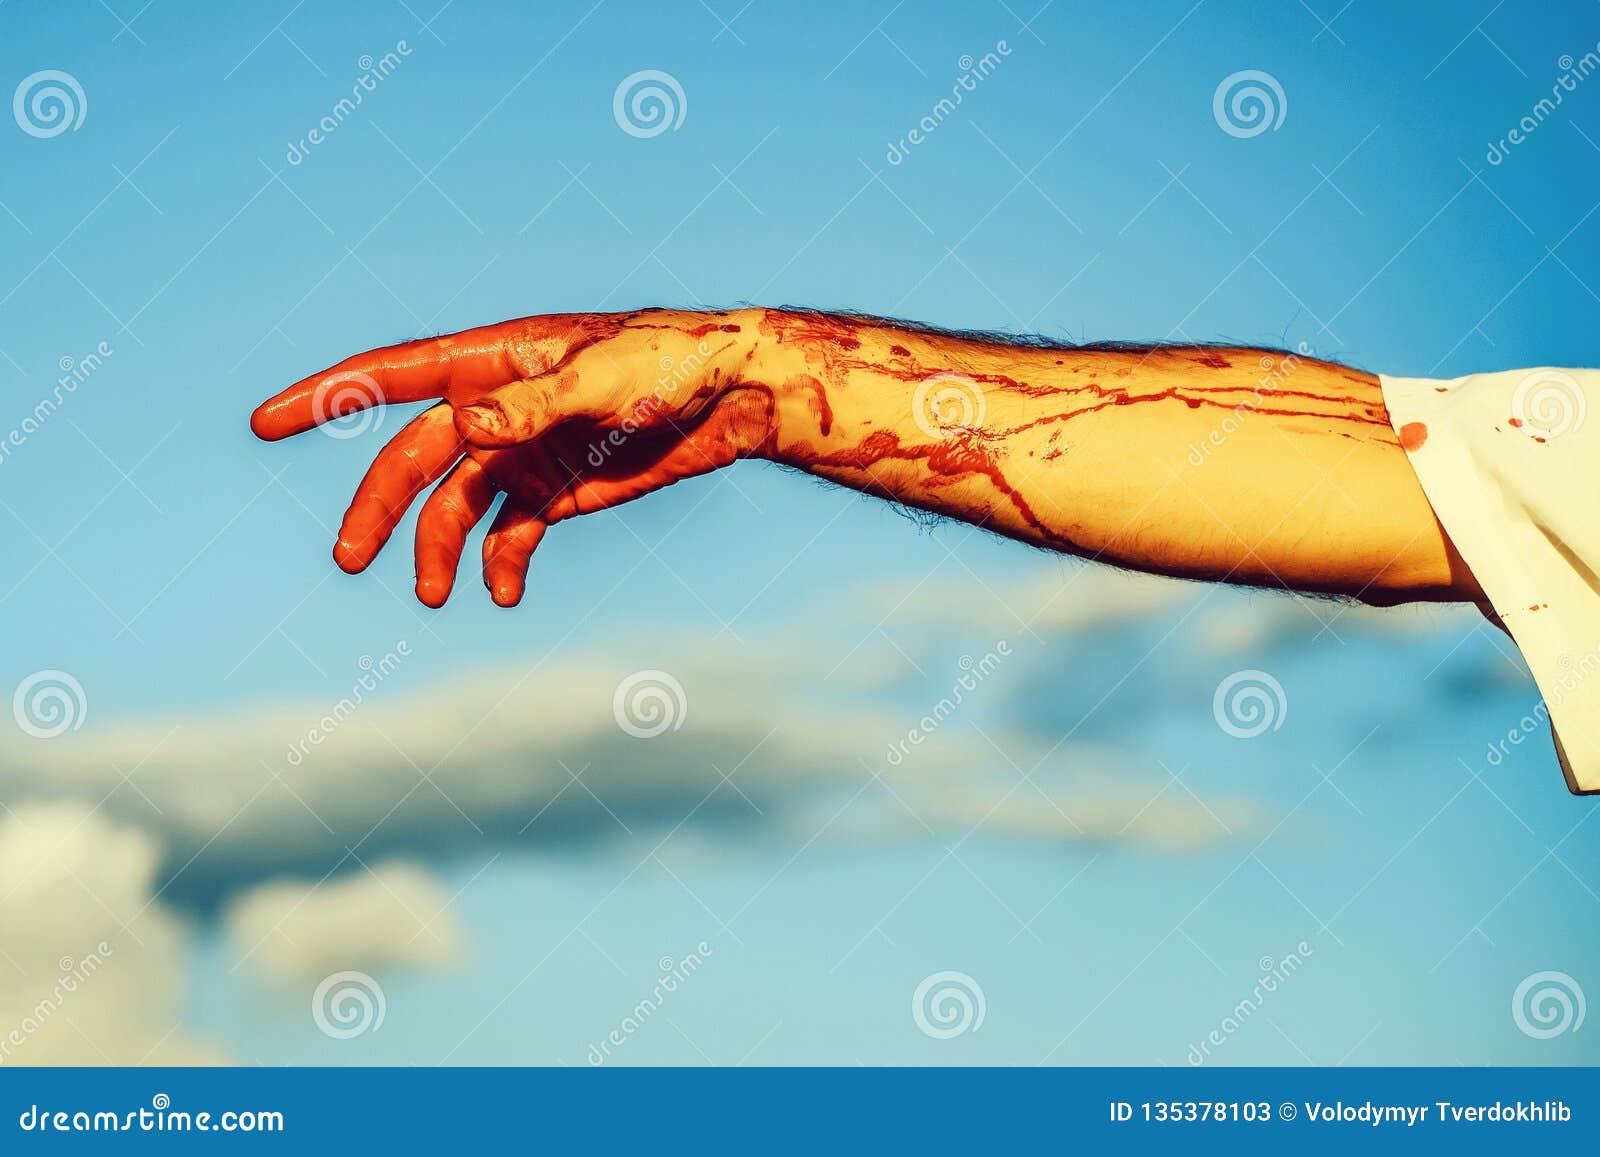 Bloody Zombie Hand with Red Blood on Blue Sky Stock Image - Image of ...